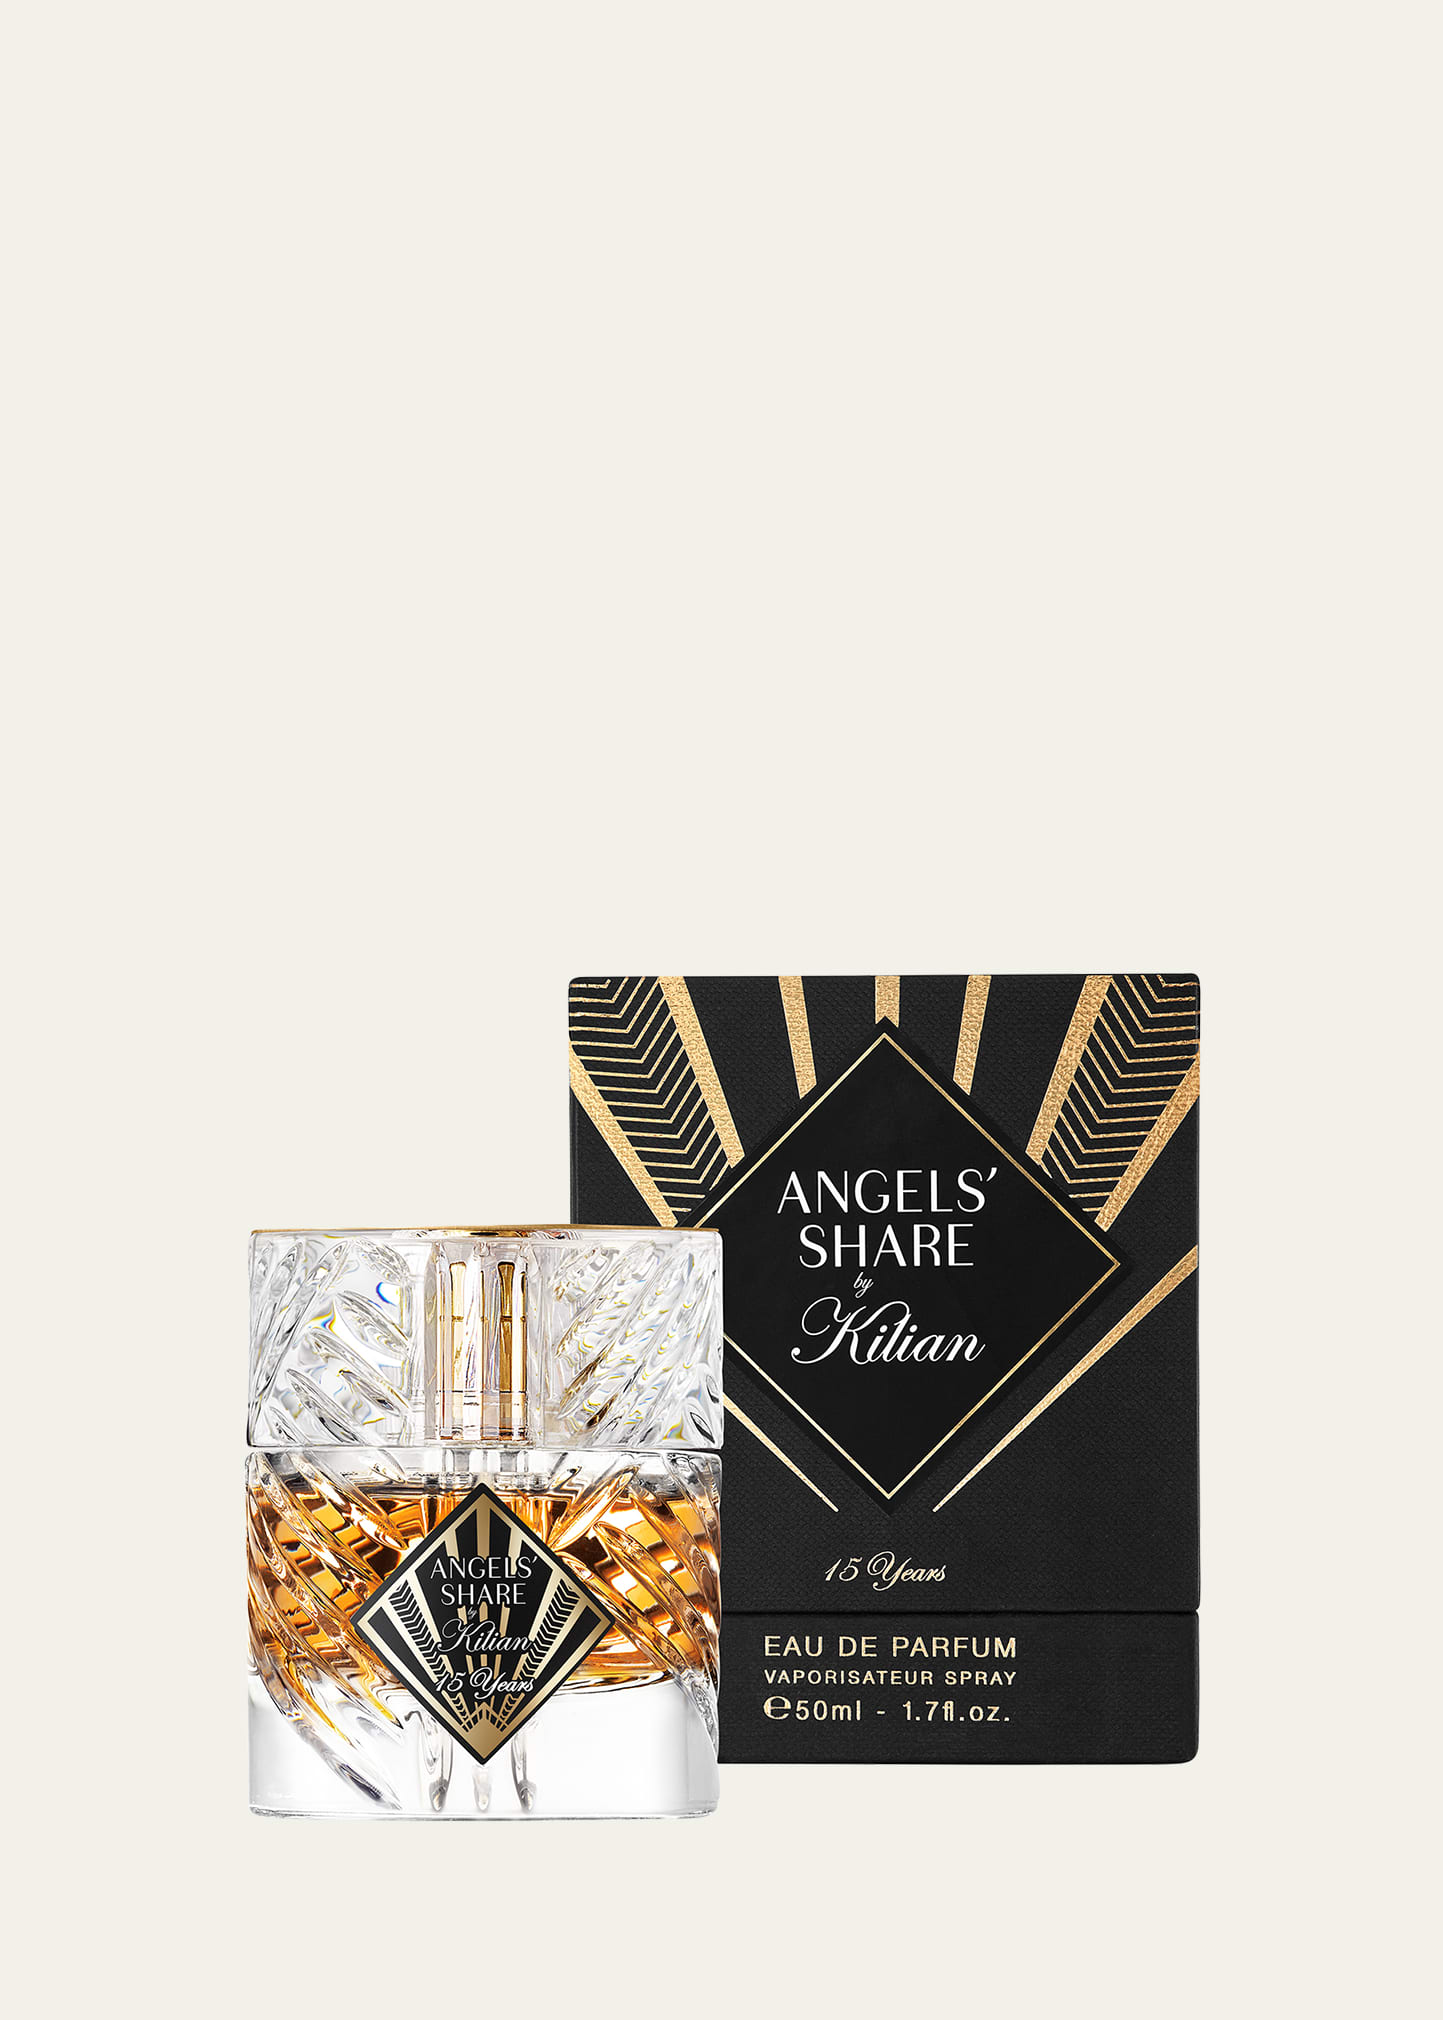 Angels' Share Eau de Parfum, 1.7 oz. - Limited 15-Year Anniversary Holiday Edition